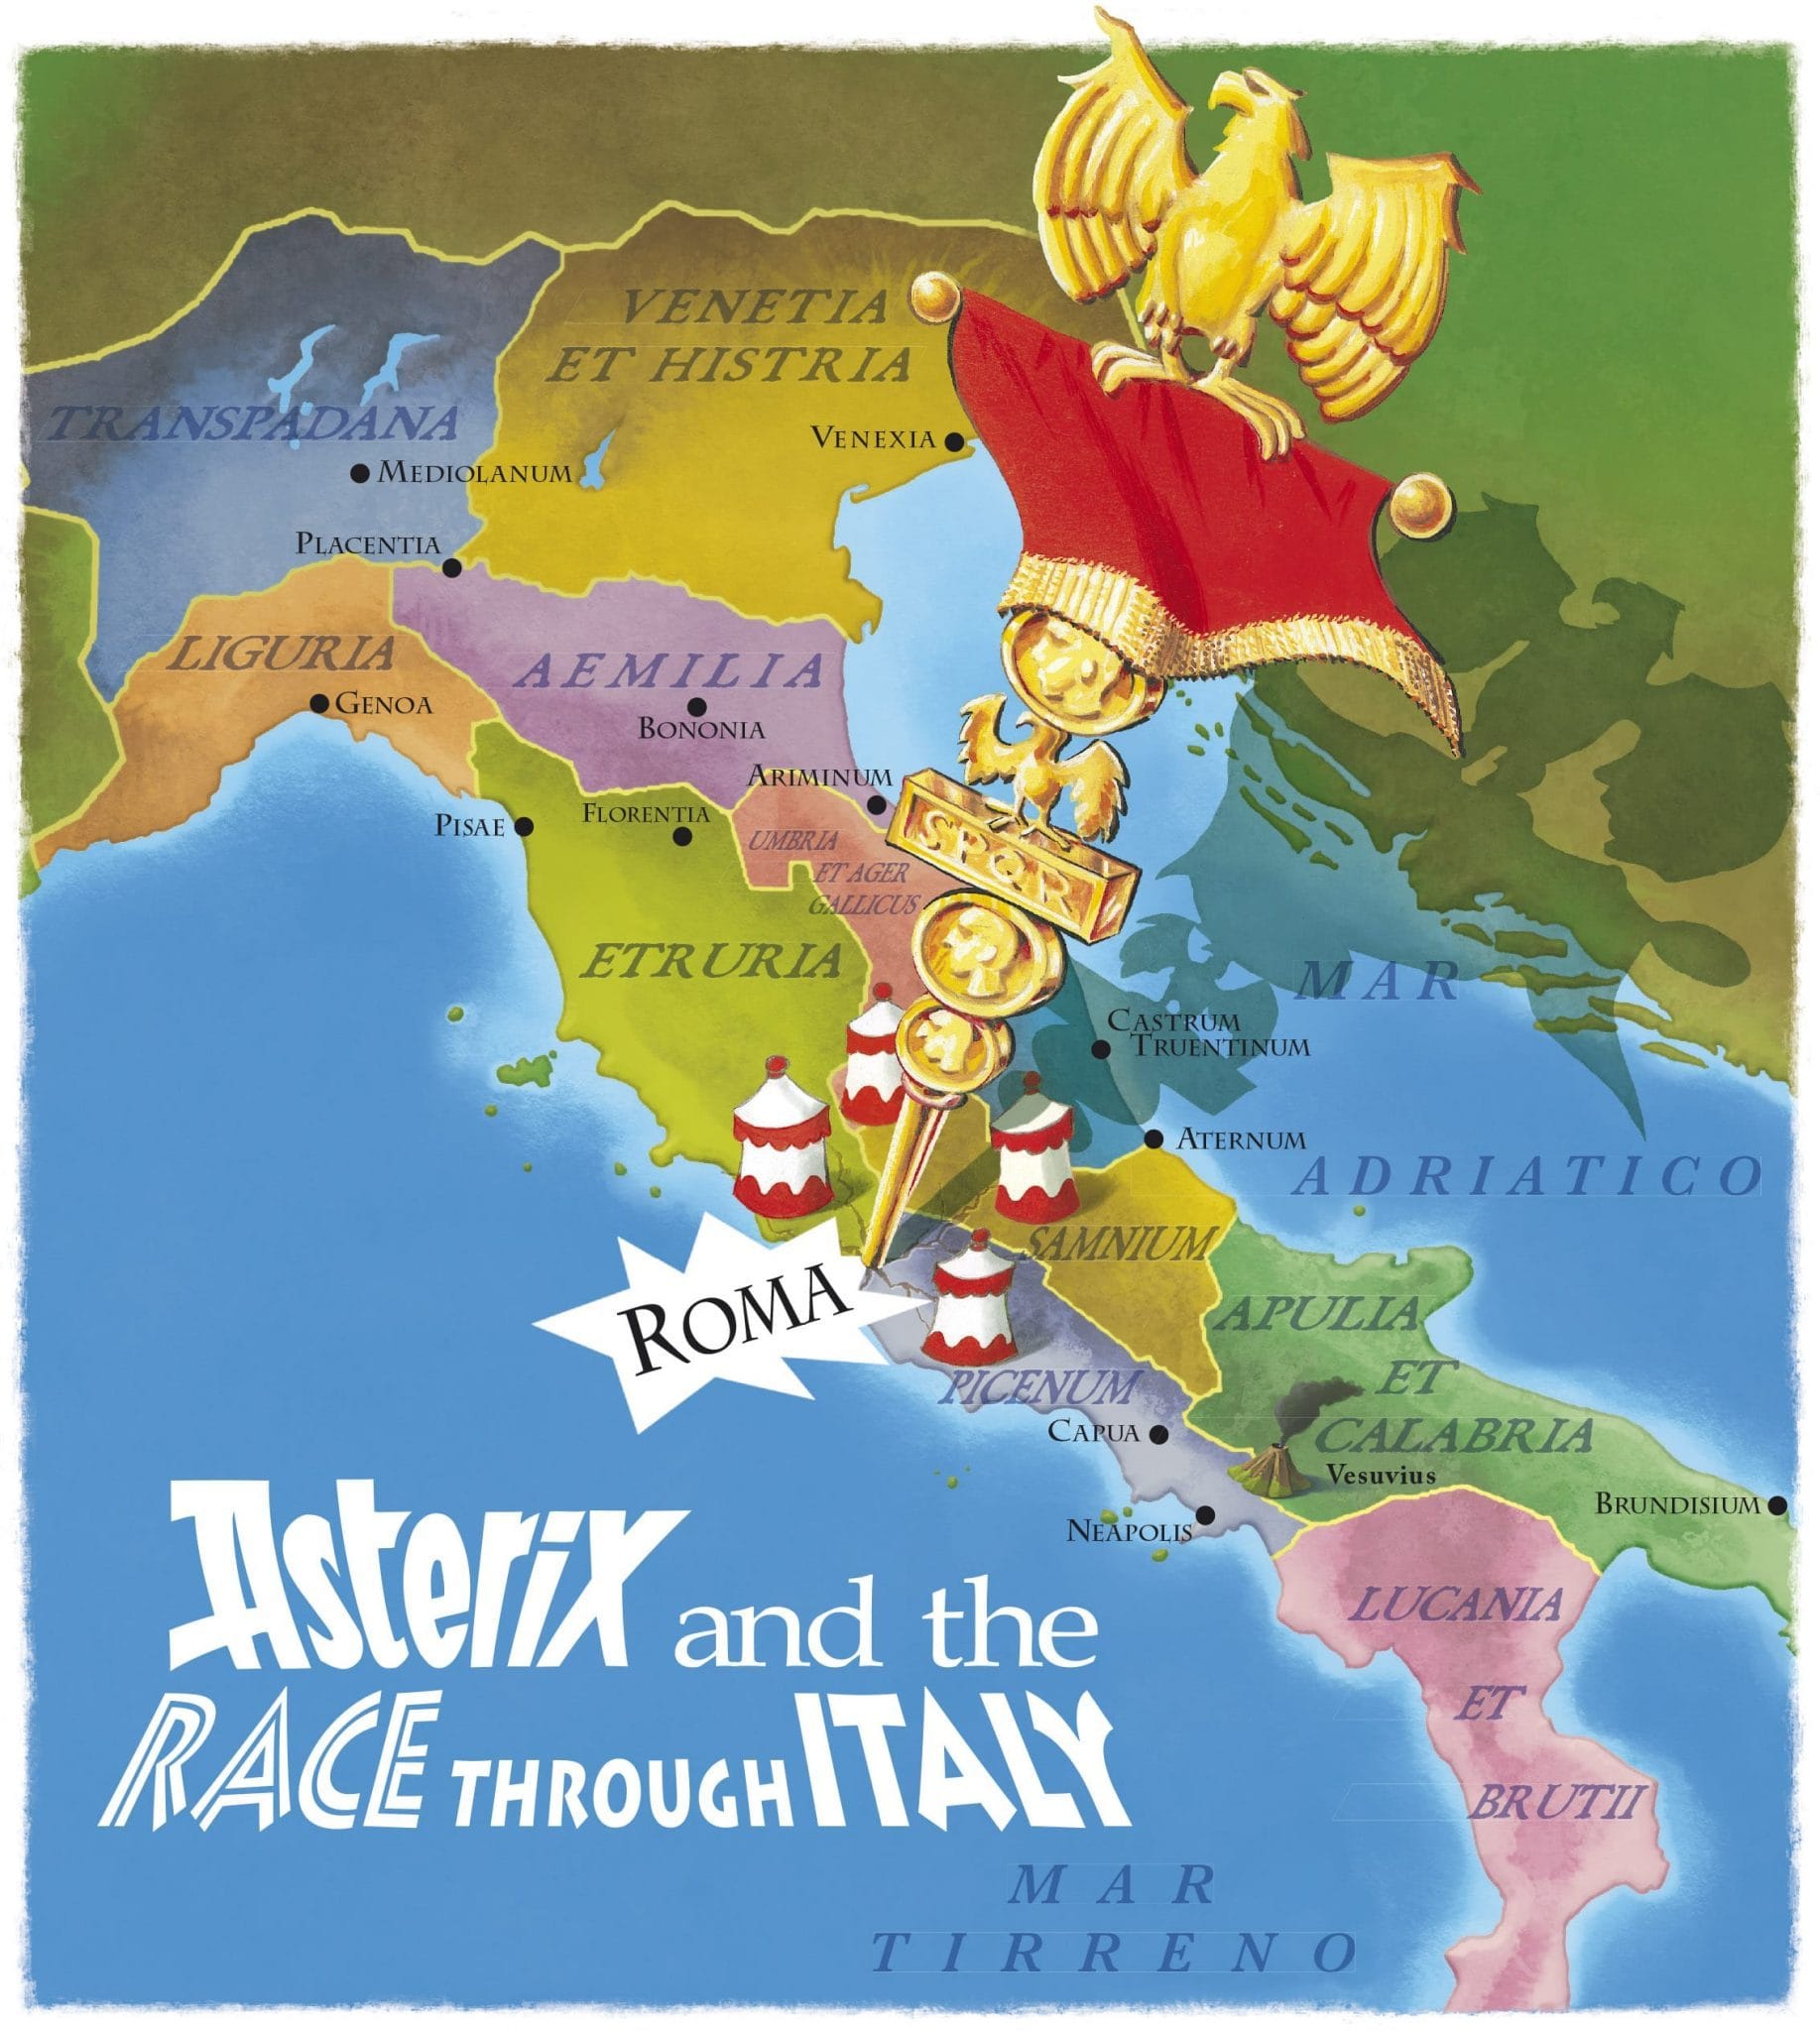 Asterix and the Chariot Race image Italy map